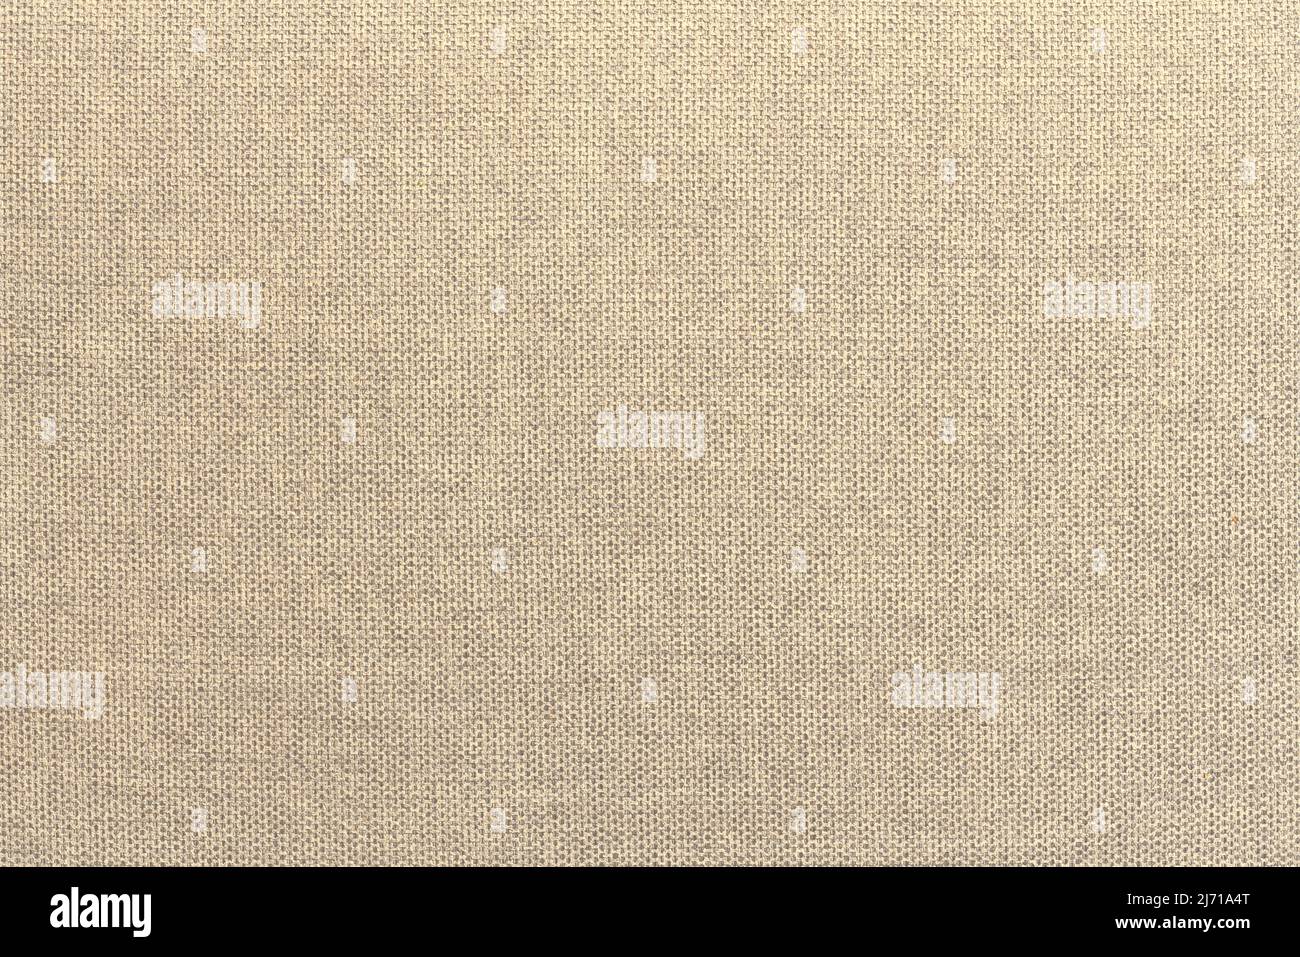 Beige cotton woven sofa cushion fabric texture background. High resolution photography Stock Photo